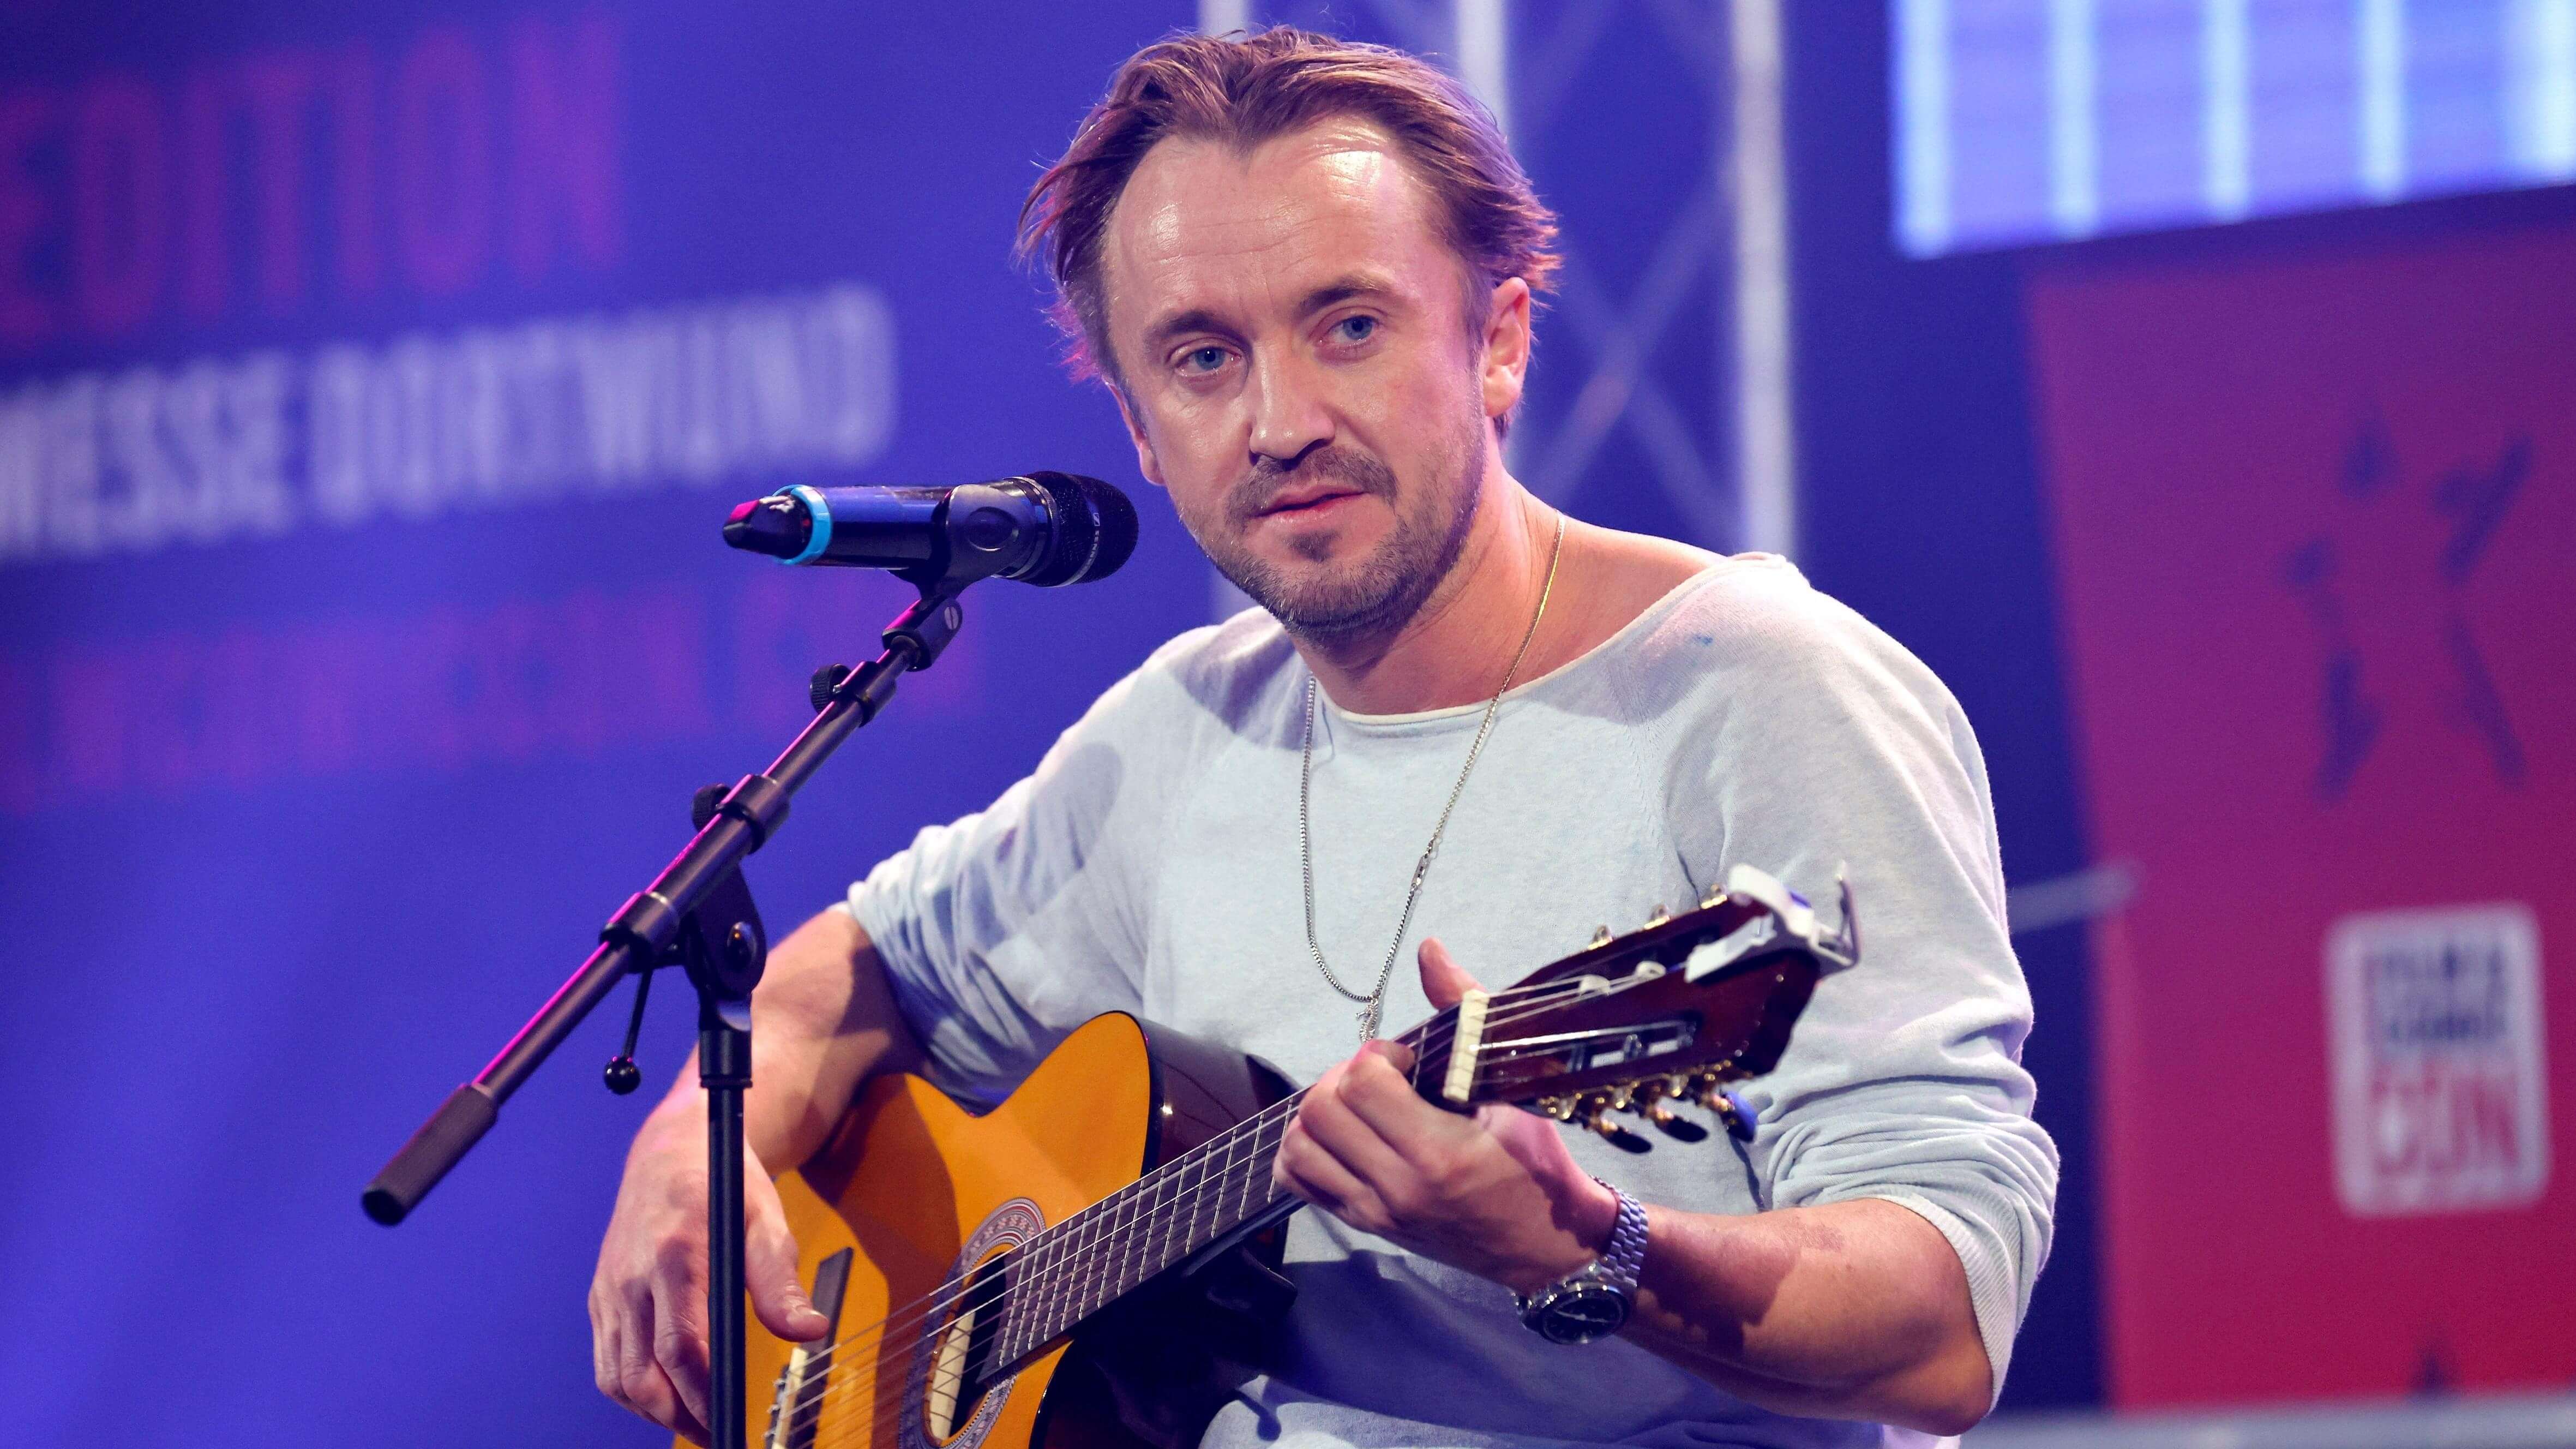 Tom Felton is playing Gandhi’s vegetarian friend, releasing new music, and still talking about Harry Potter